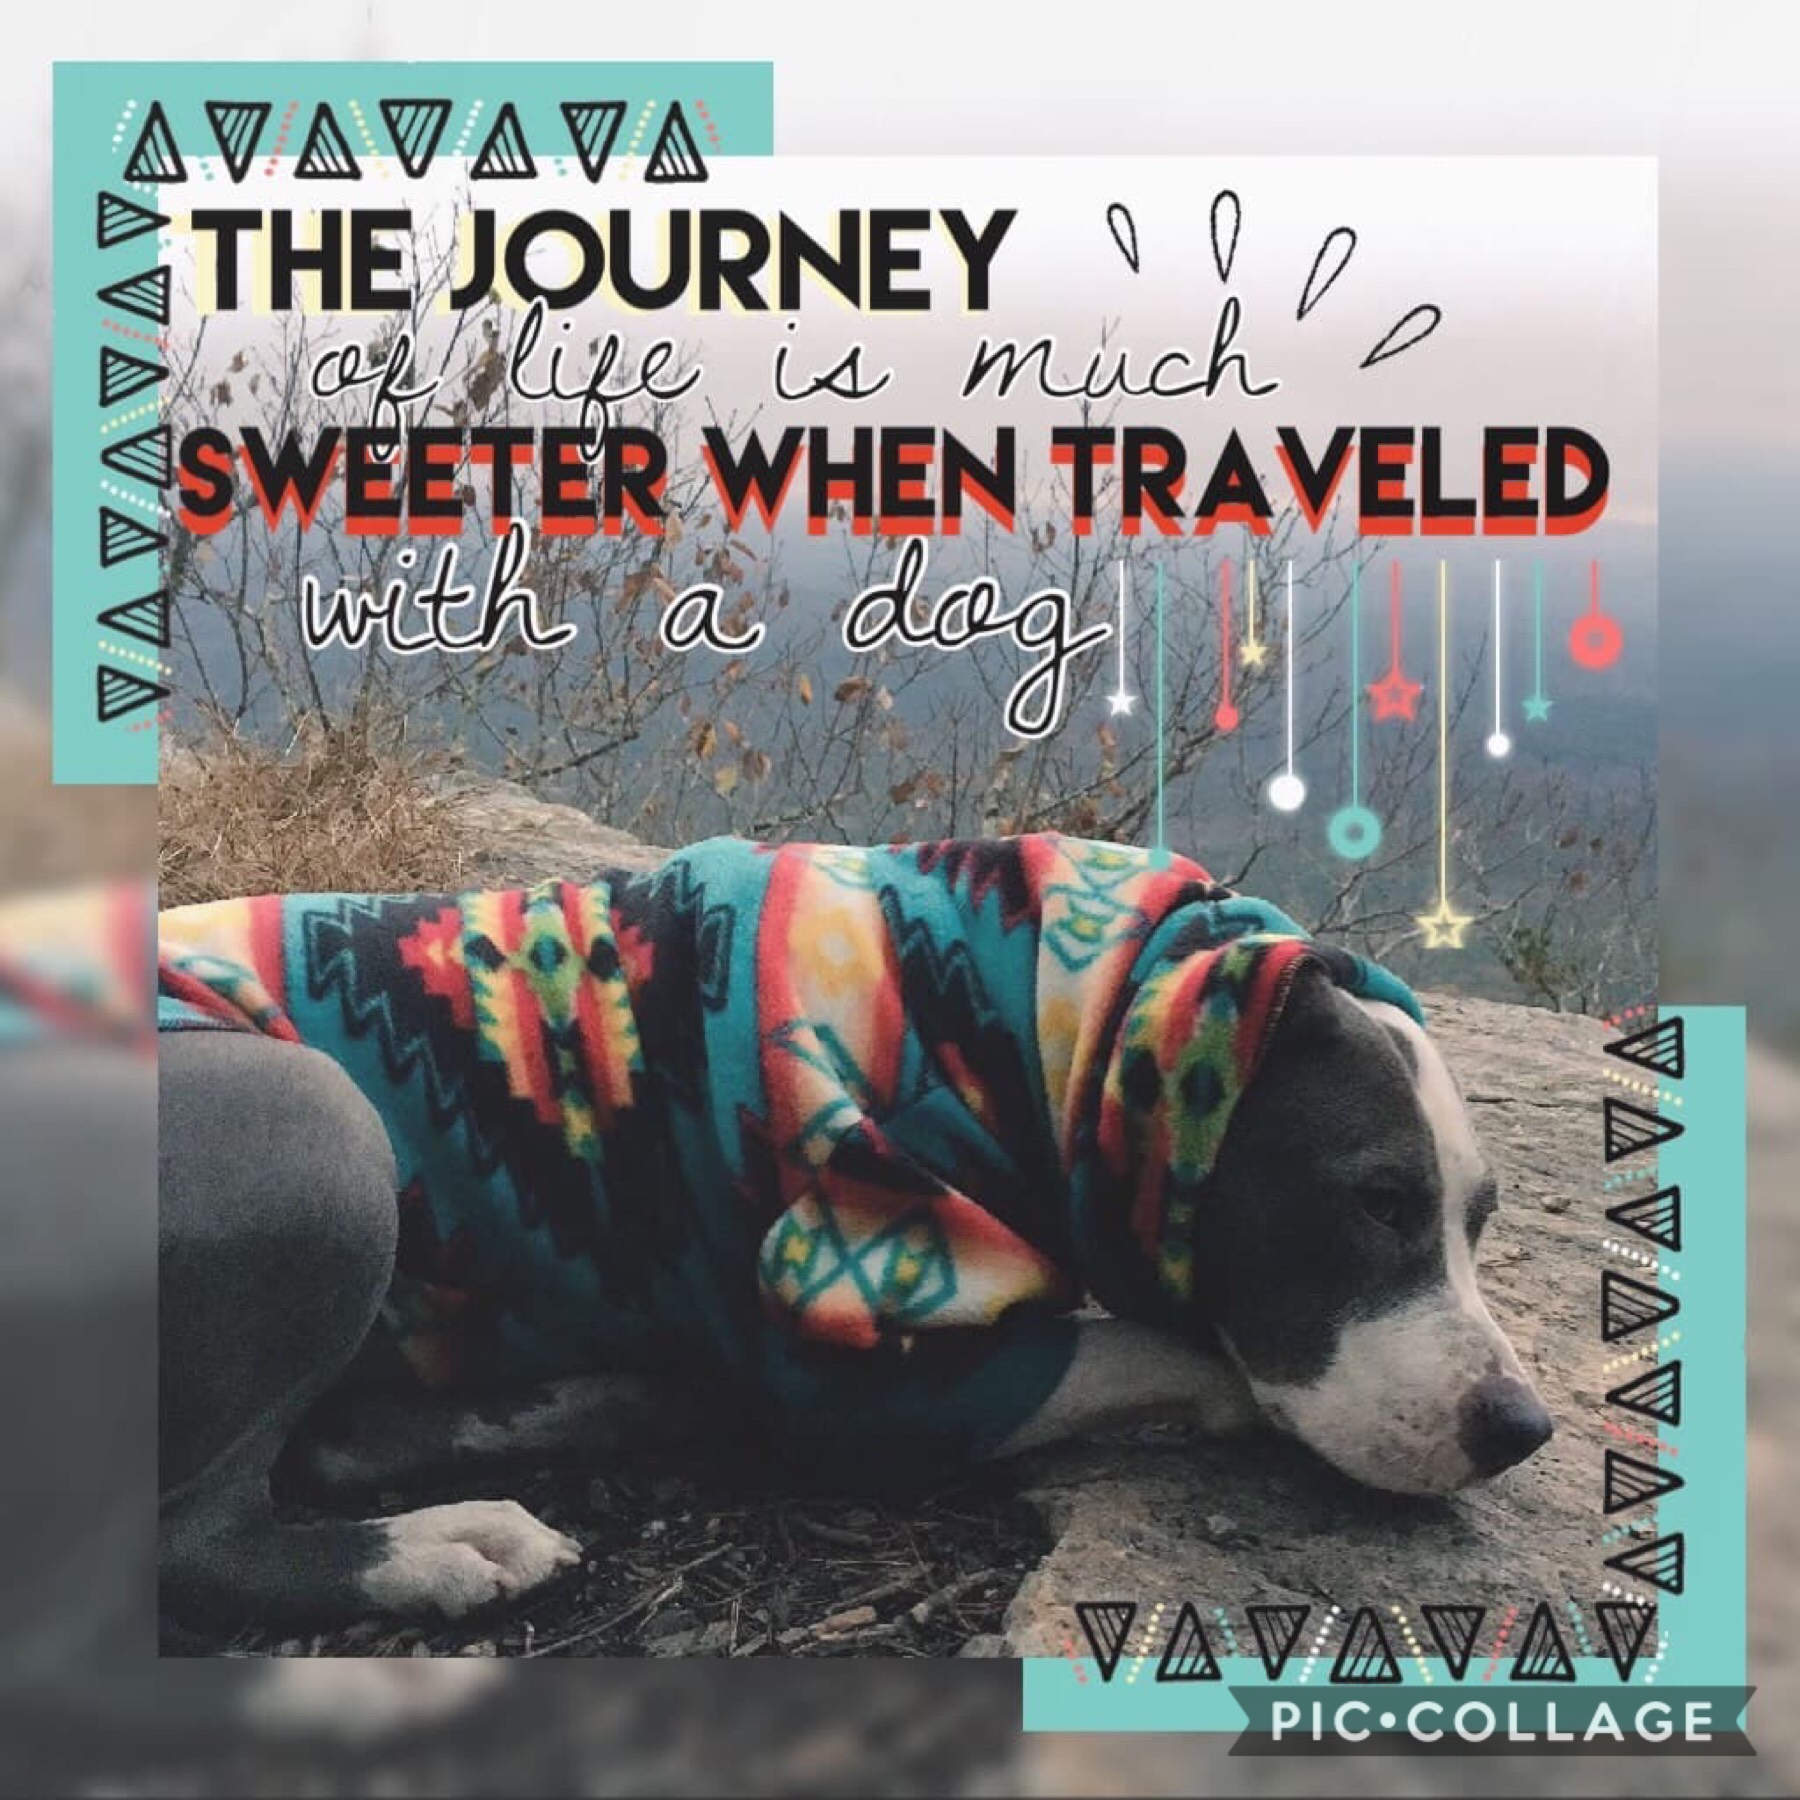 T a p
Entry into DogandAvengerlover’s contest! (I forgot to say this but my last collage’s bg is from _Rylee_Beth_) I hope you like this!
QOTD:Do you gave a dog?
AOTD: Nope, but I have a cat that acts like a dog so... close enough😂😂